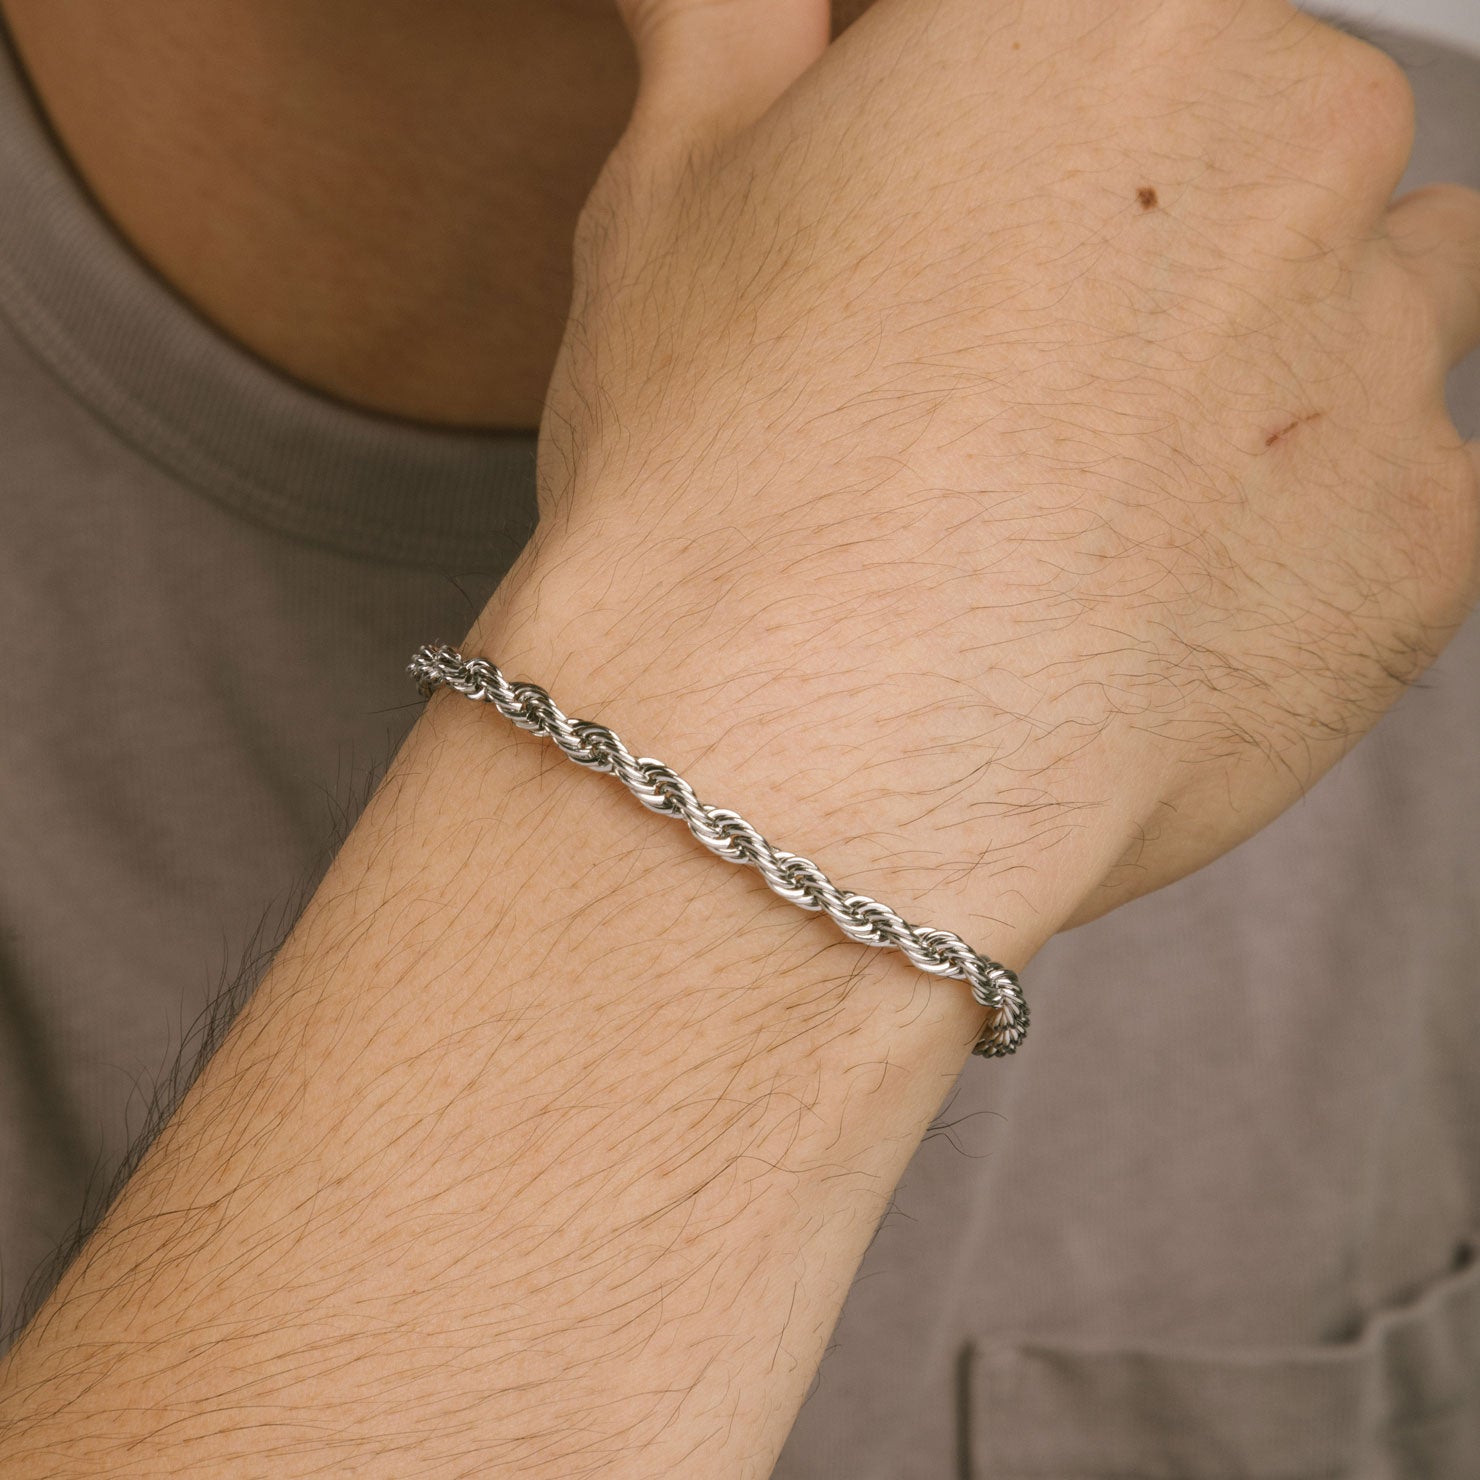 A model wearing the Twist Rope Chain Bracelet in Silver is crafted from non-tarnish and water-resistant stainless steel, with dimensions of 18 cm in length and 4 mm in width.